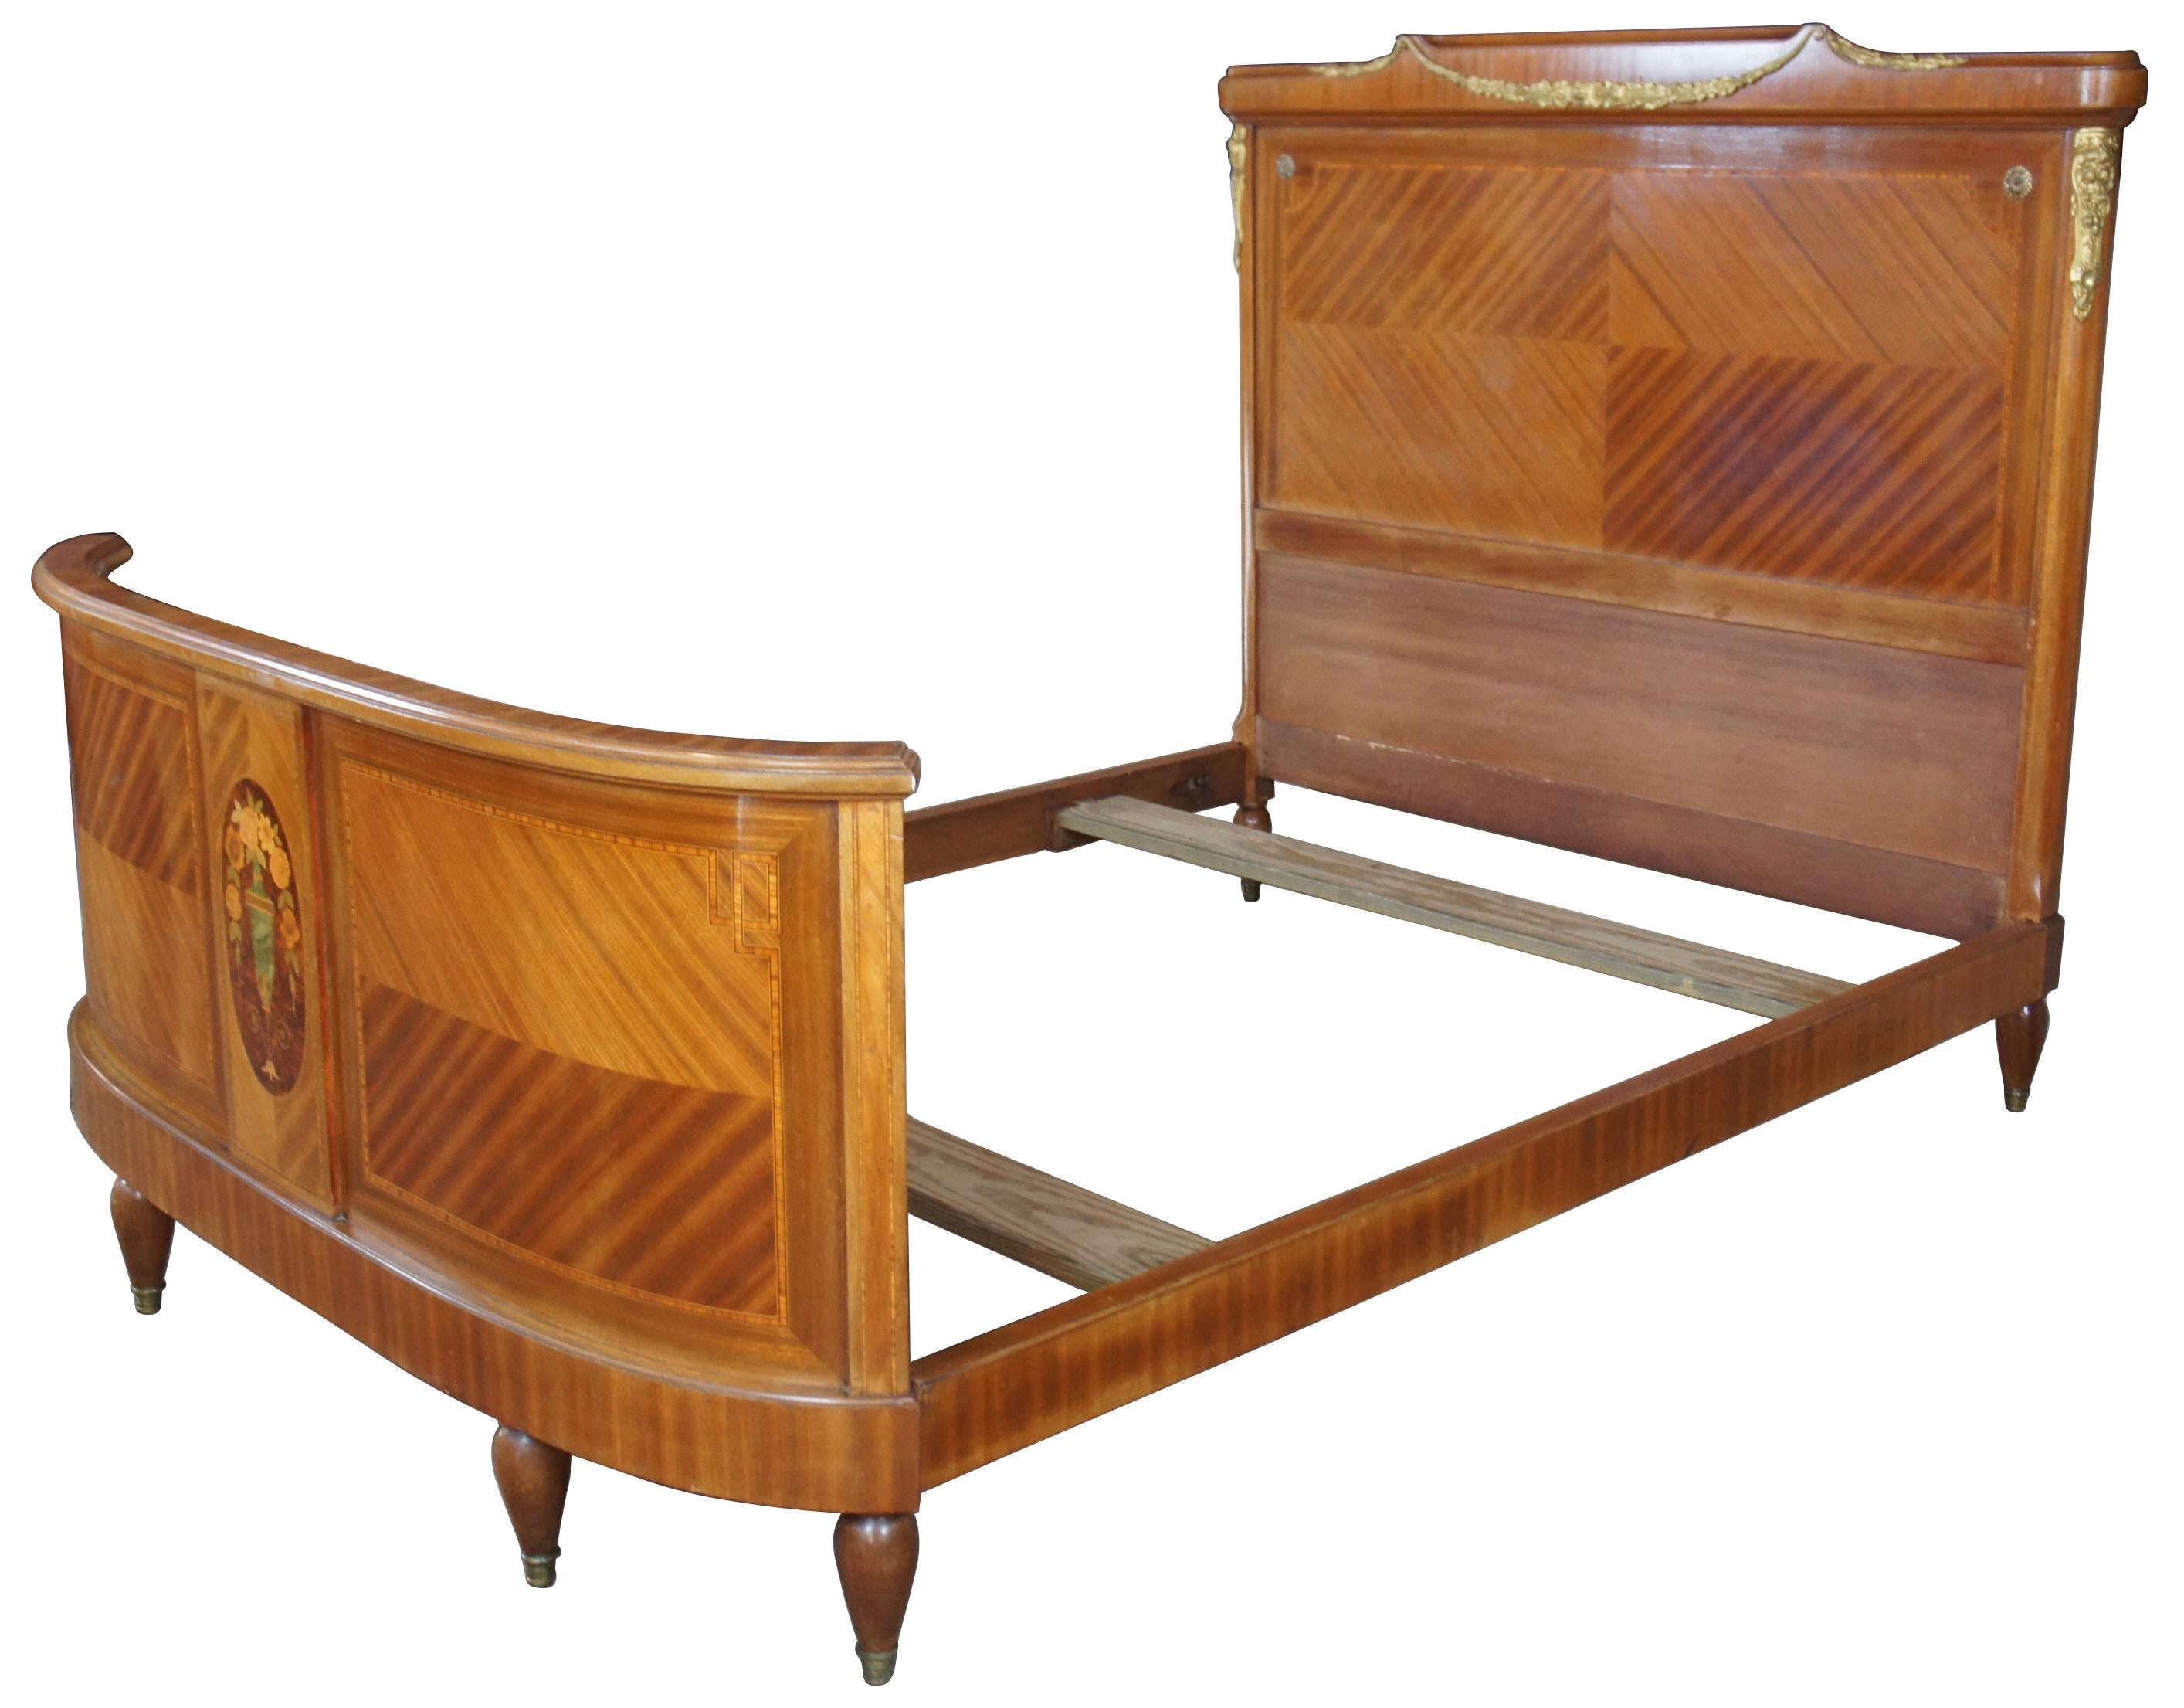 19th century Italian neoclassical full size bed. Made from walnut with bookmatched veneer in a diamond pattern, burled accents and inlay. Features a curved front supported by four pegged legs and a high back with gilt bronze mounts. This exquisite